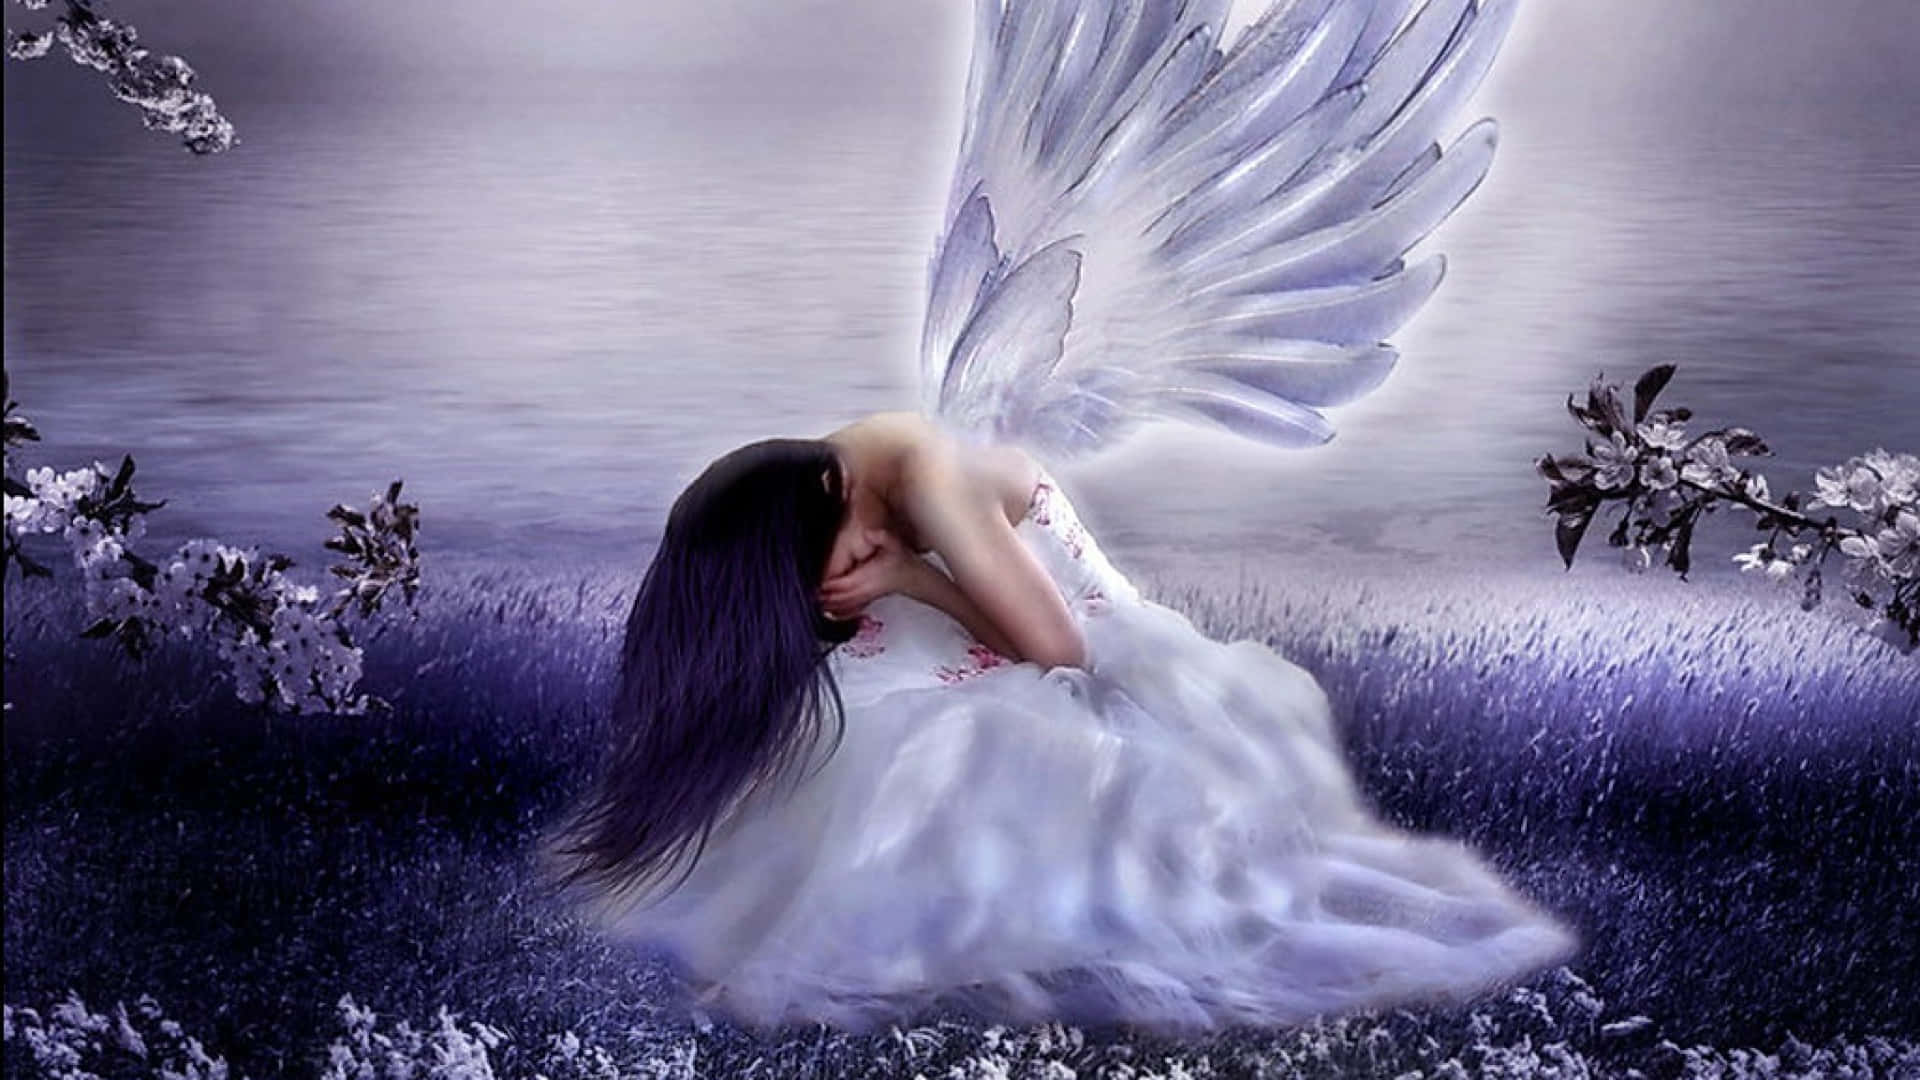 A beautiful cosmic landscape featuring bright angelic wings.